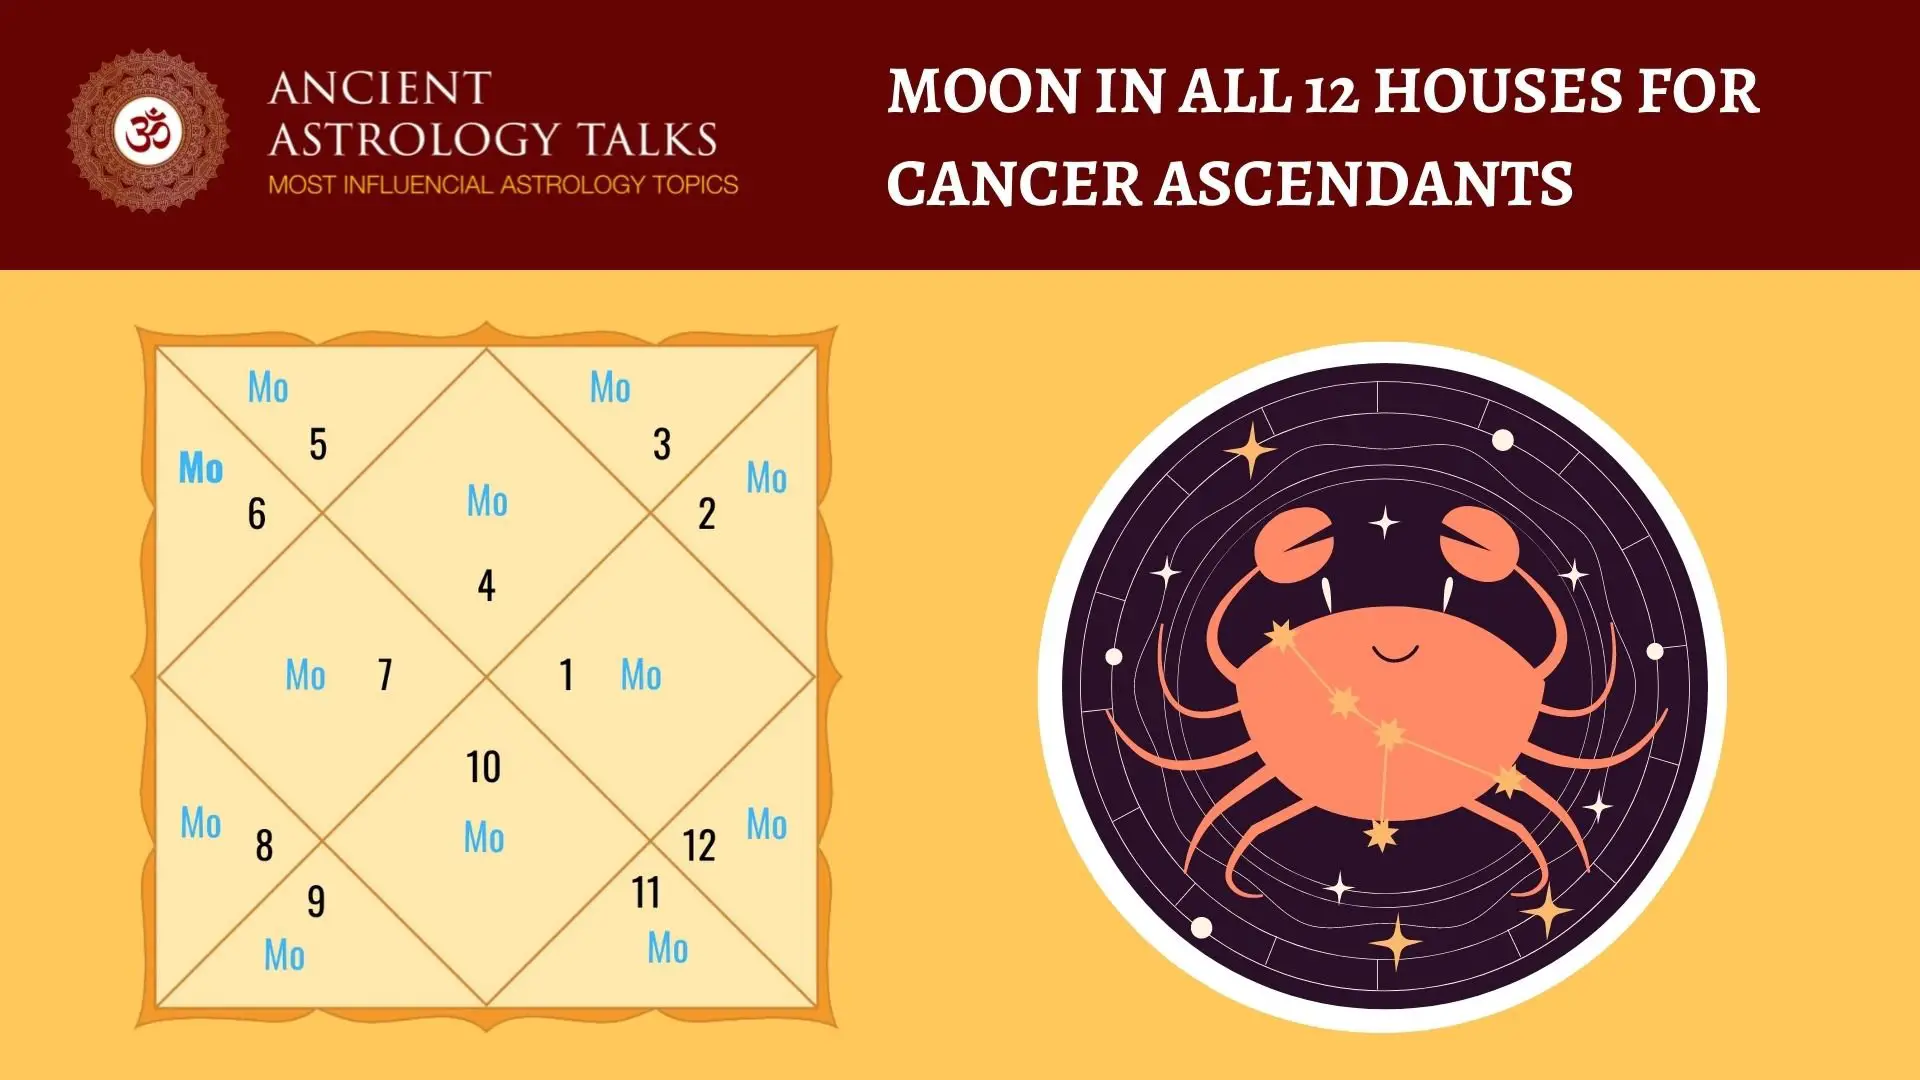 MOON IN ALL 12 HOUSES FOR CANCER ASCENDANTS